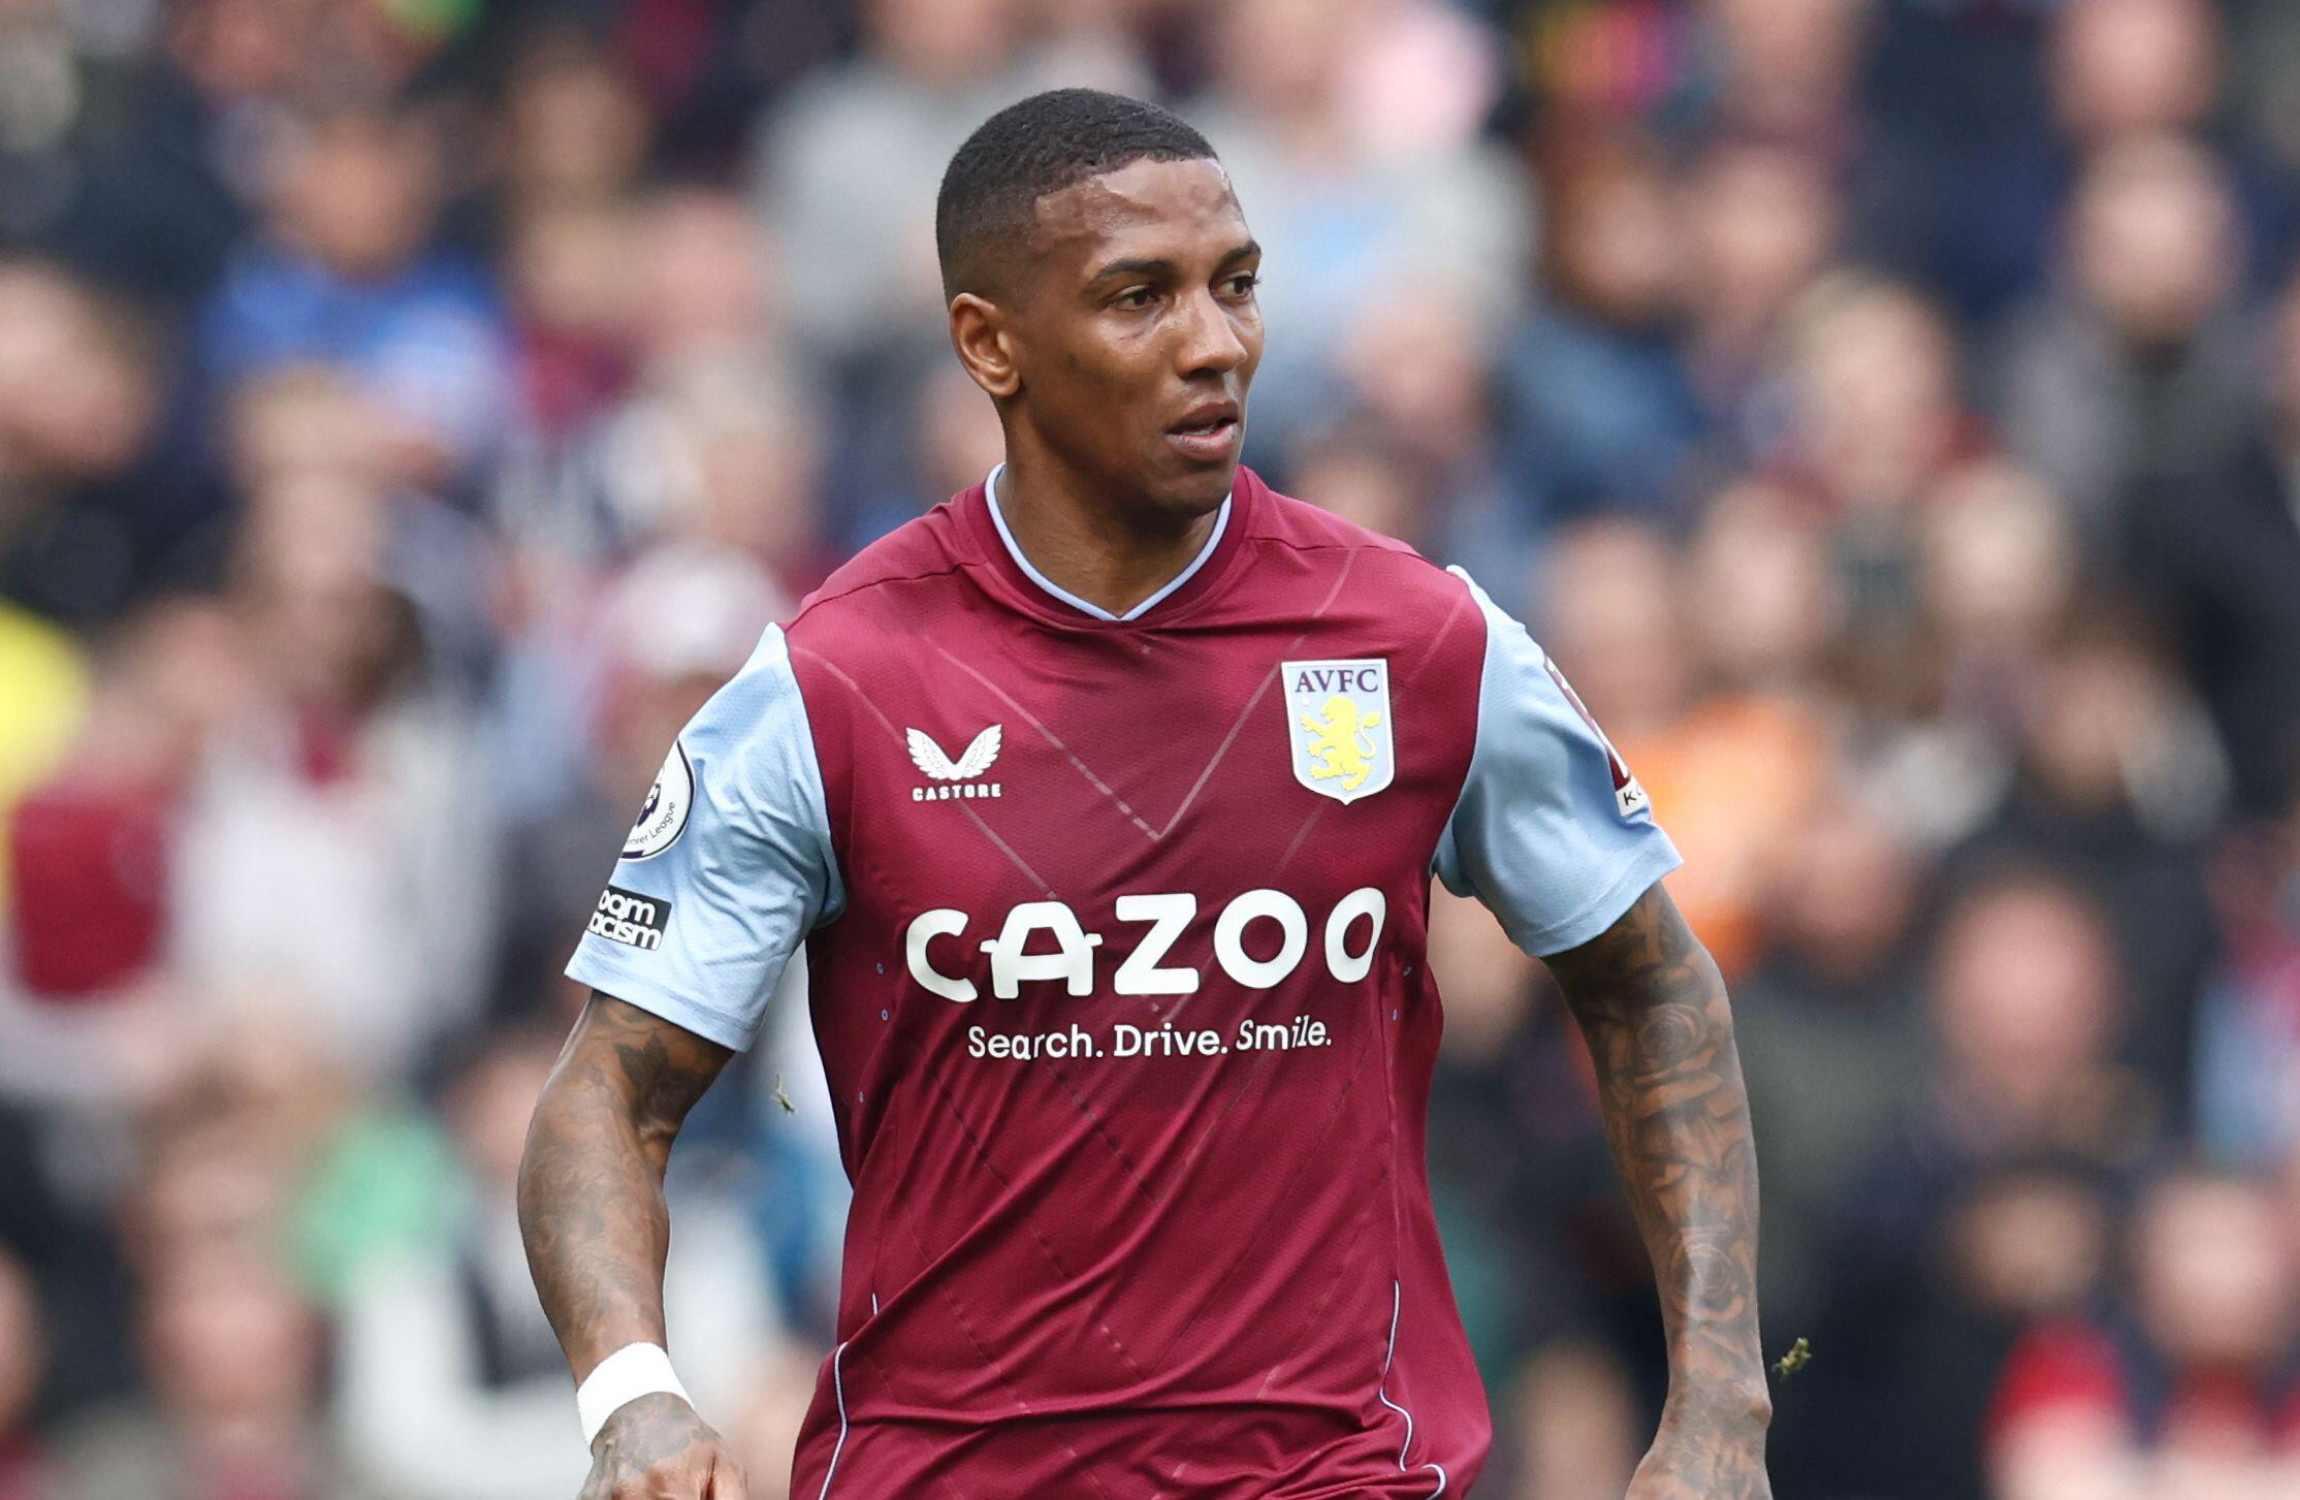 Ex-England international Ashley Young to leave Aston Villa · The 42